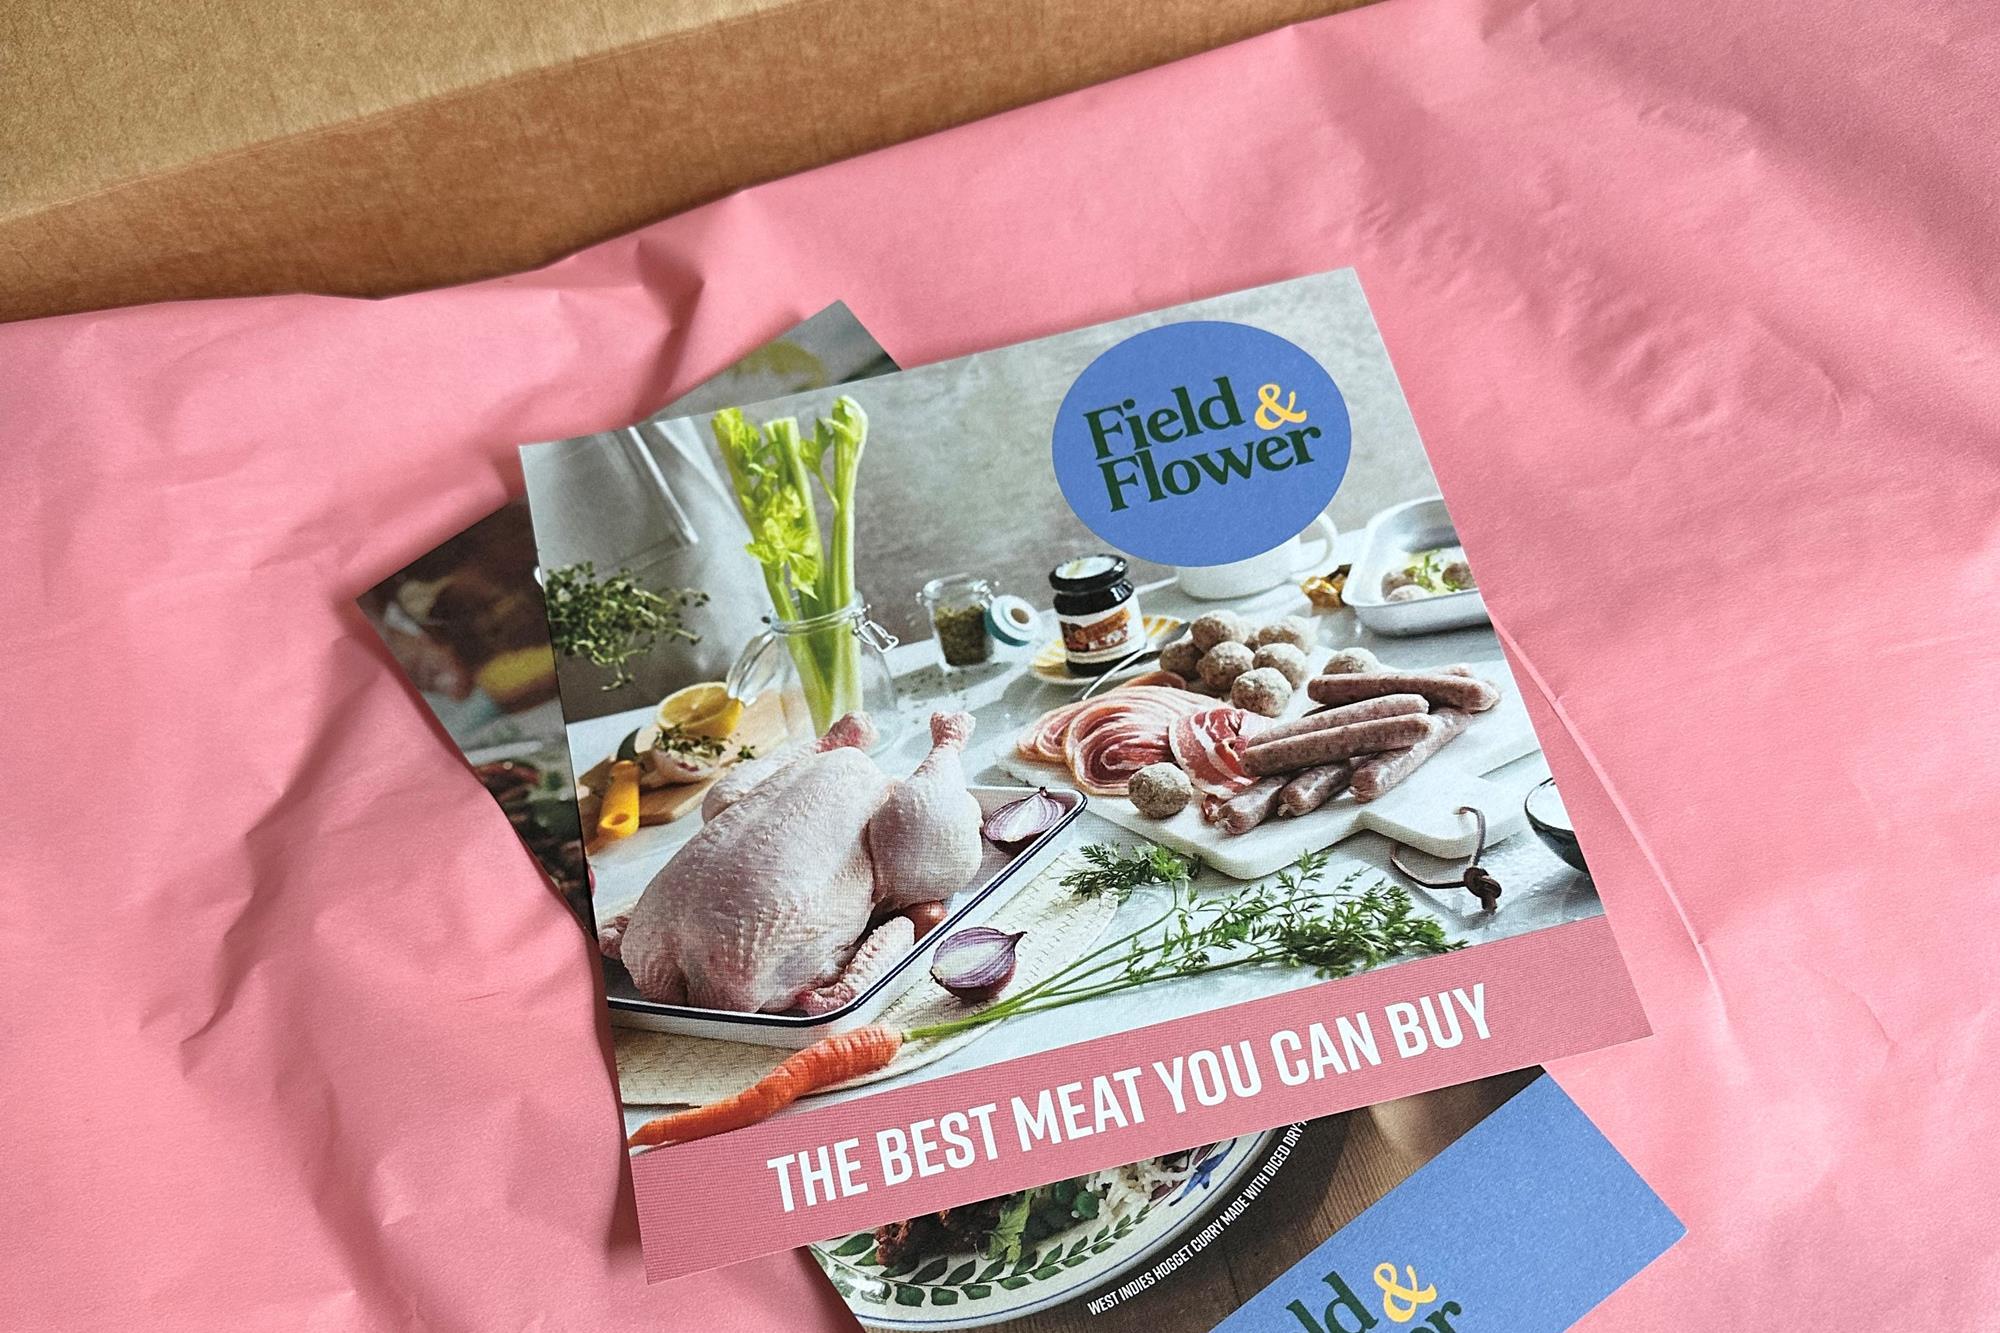 DTC meat box provider Field & Flower launches rebrand, News